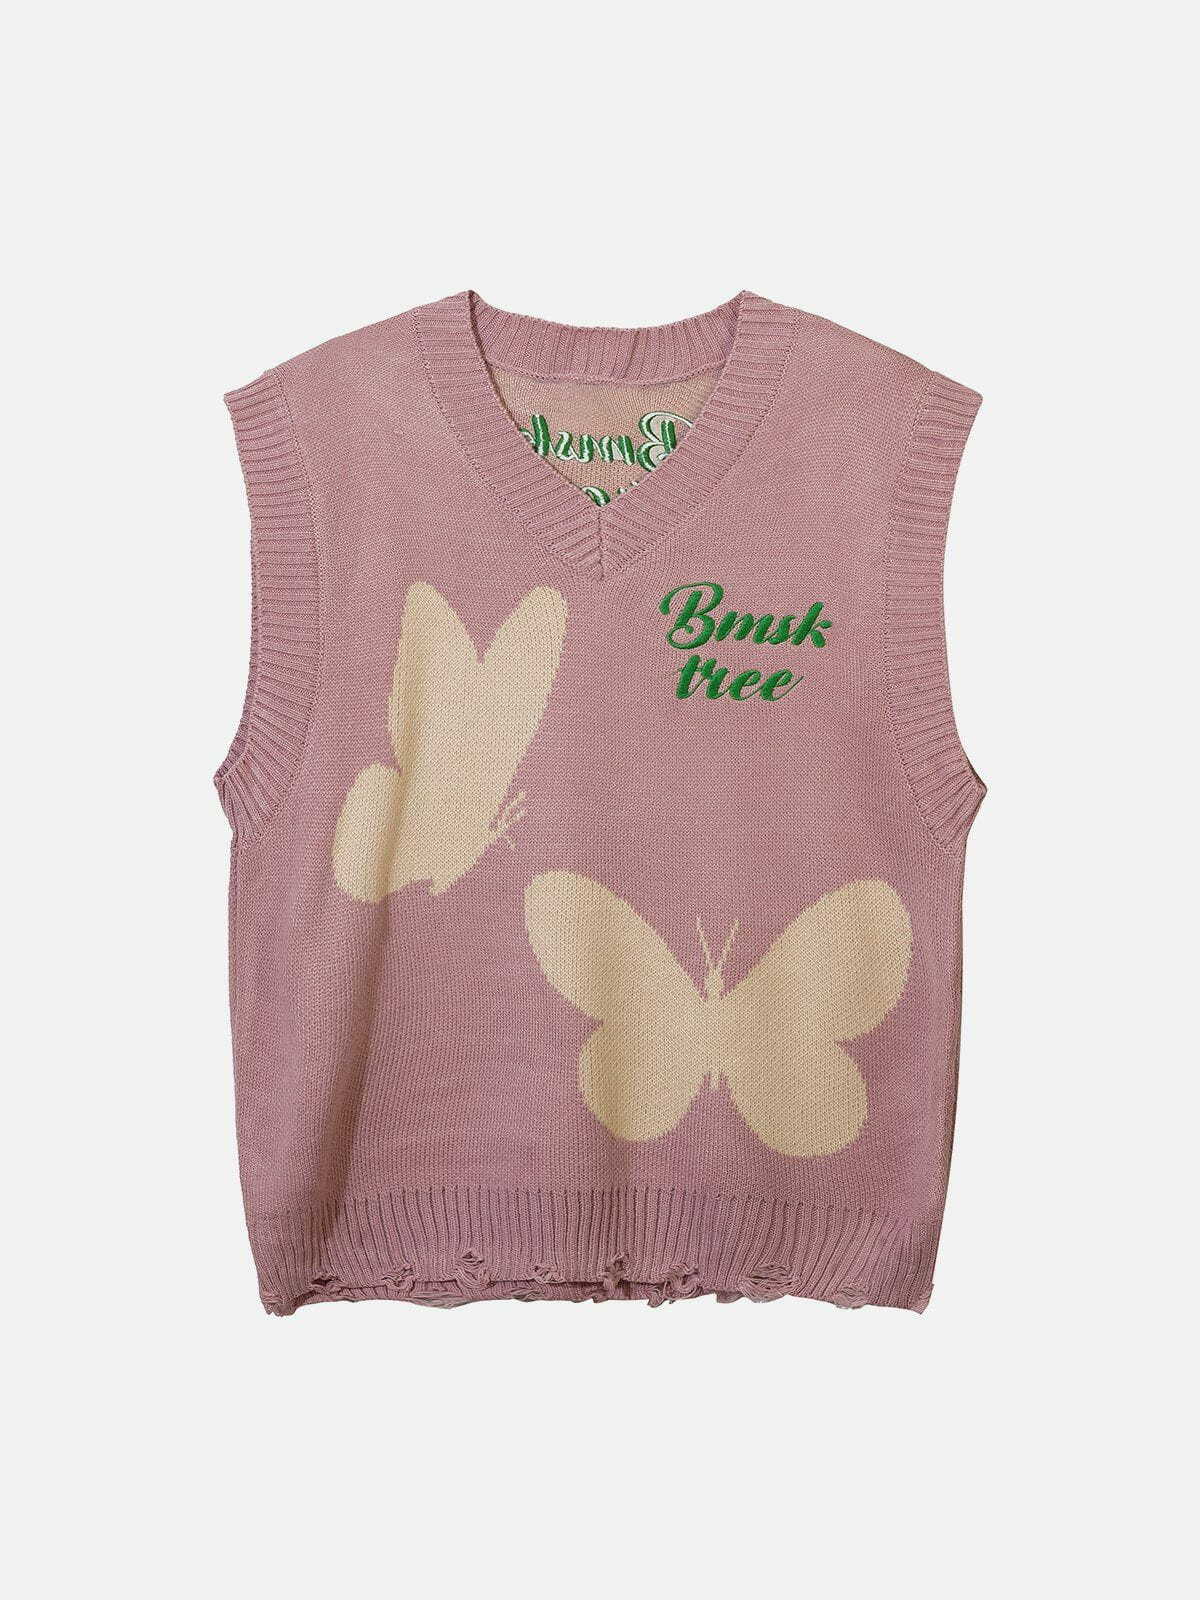 butterfly print sweater vest quirky y2k fashion essential 4770